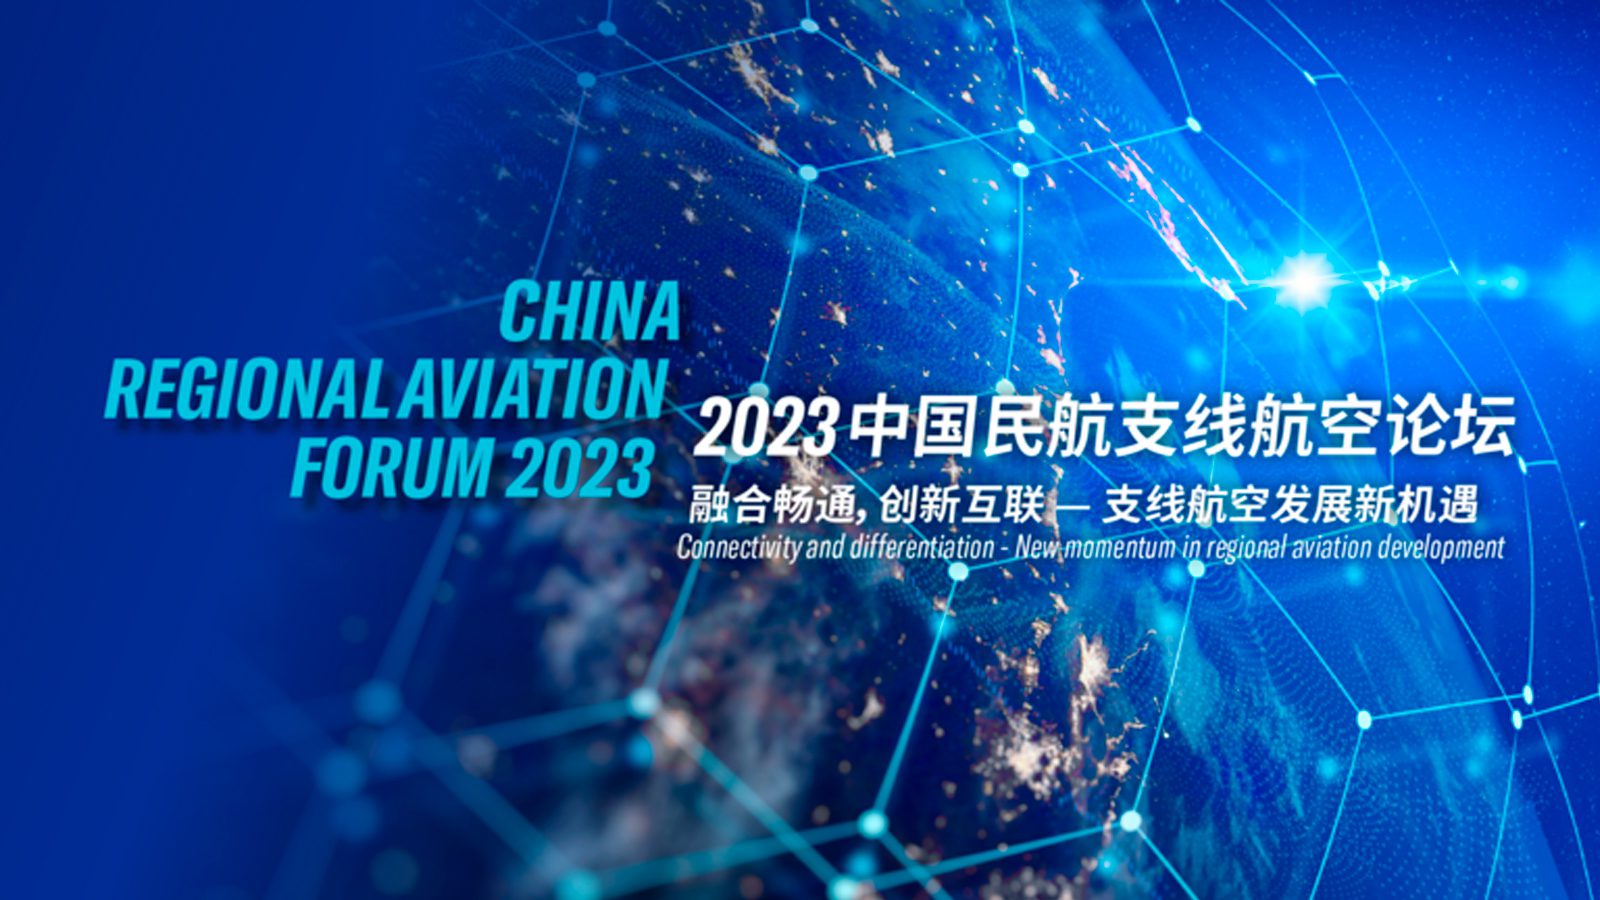 Embraer Hosts the 2023 China Regional Aviation Forum